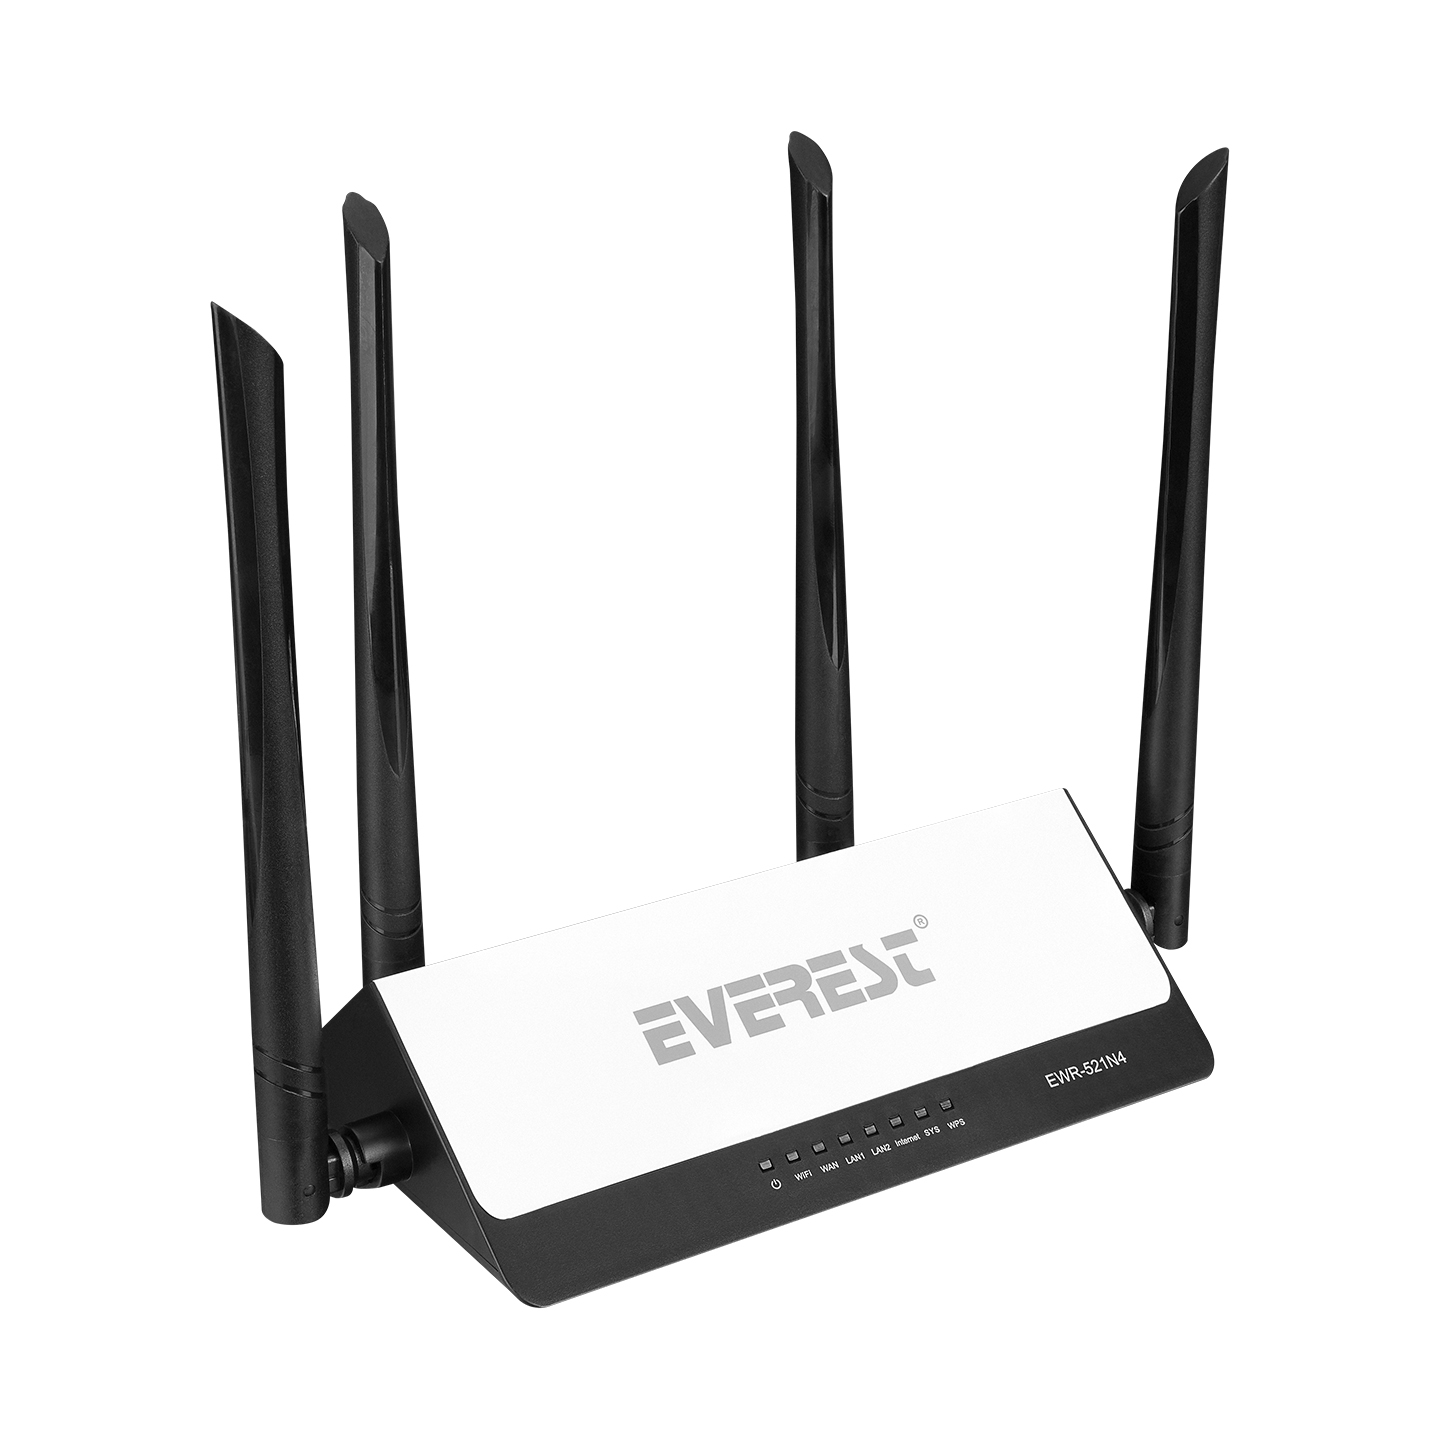 Everest EWR-521N4 Smart (APP Control) 300 Mbps Repeater + Access Point + Bridge Wireless Router